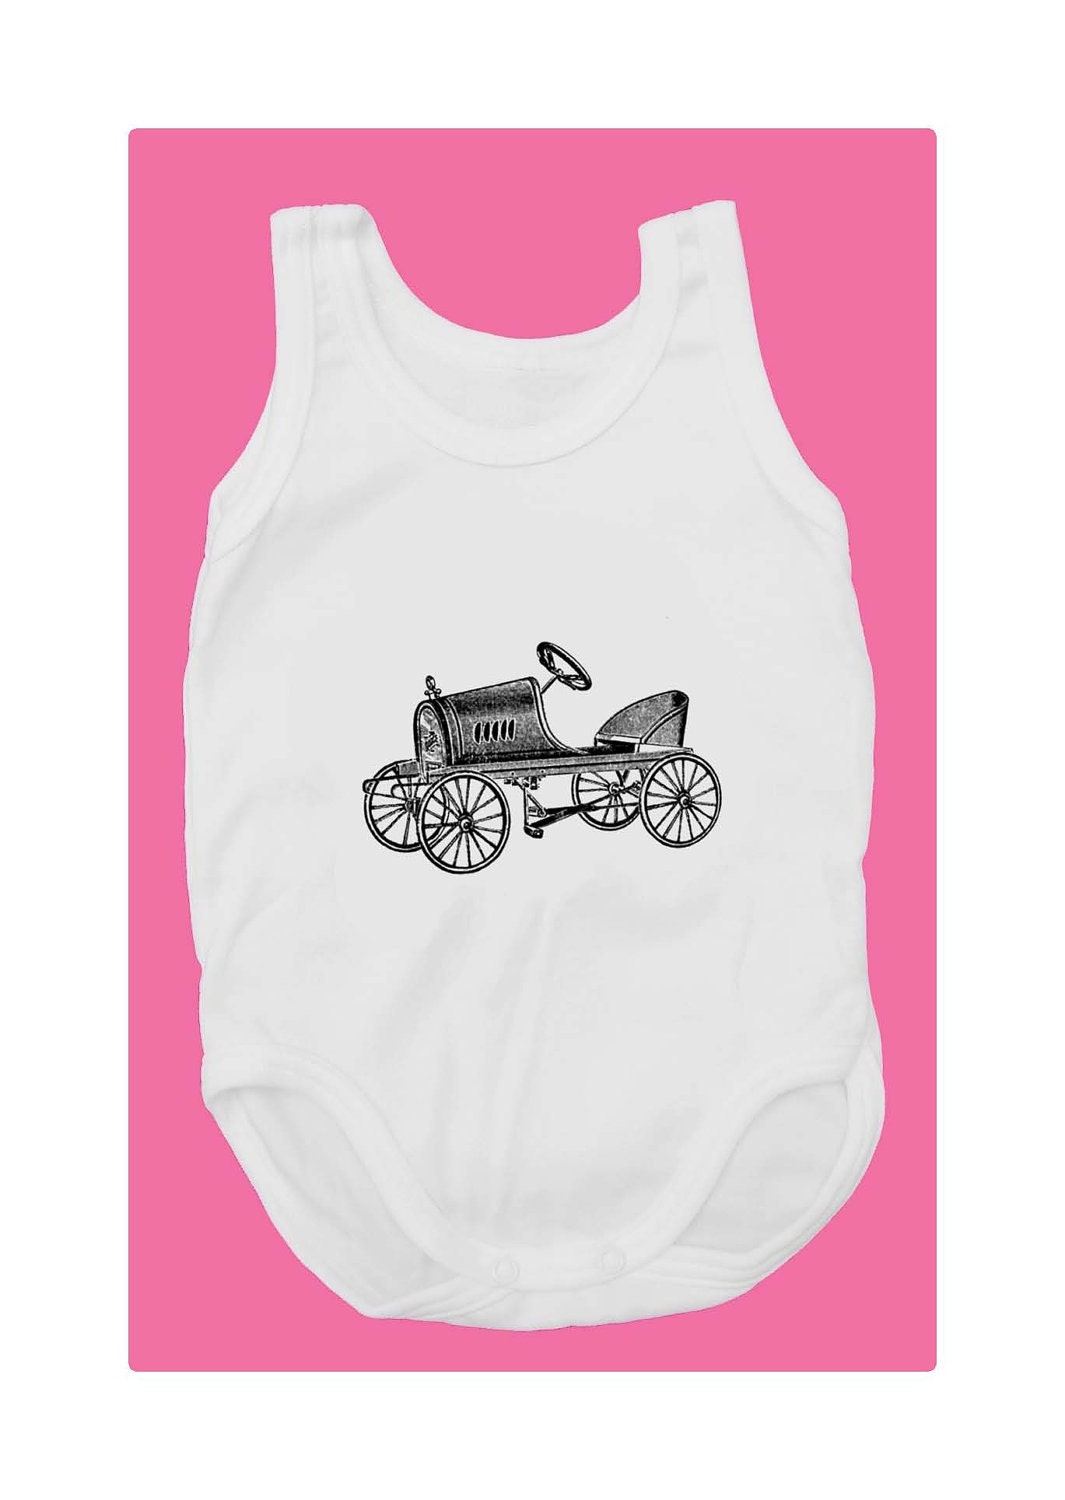 Fitipaldi (100% White cotton baby bodysuit with vintage toy racing car print) - mmmfantasiadealgodon